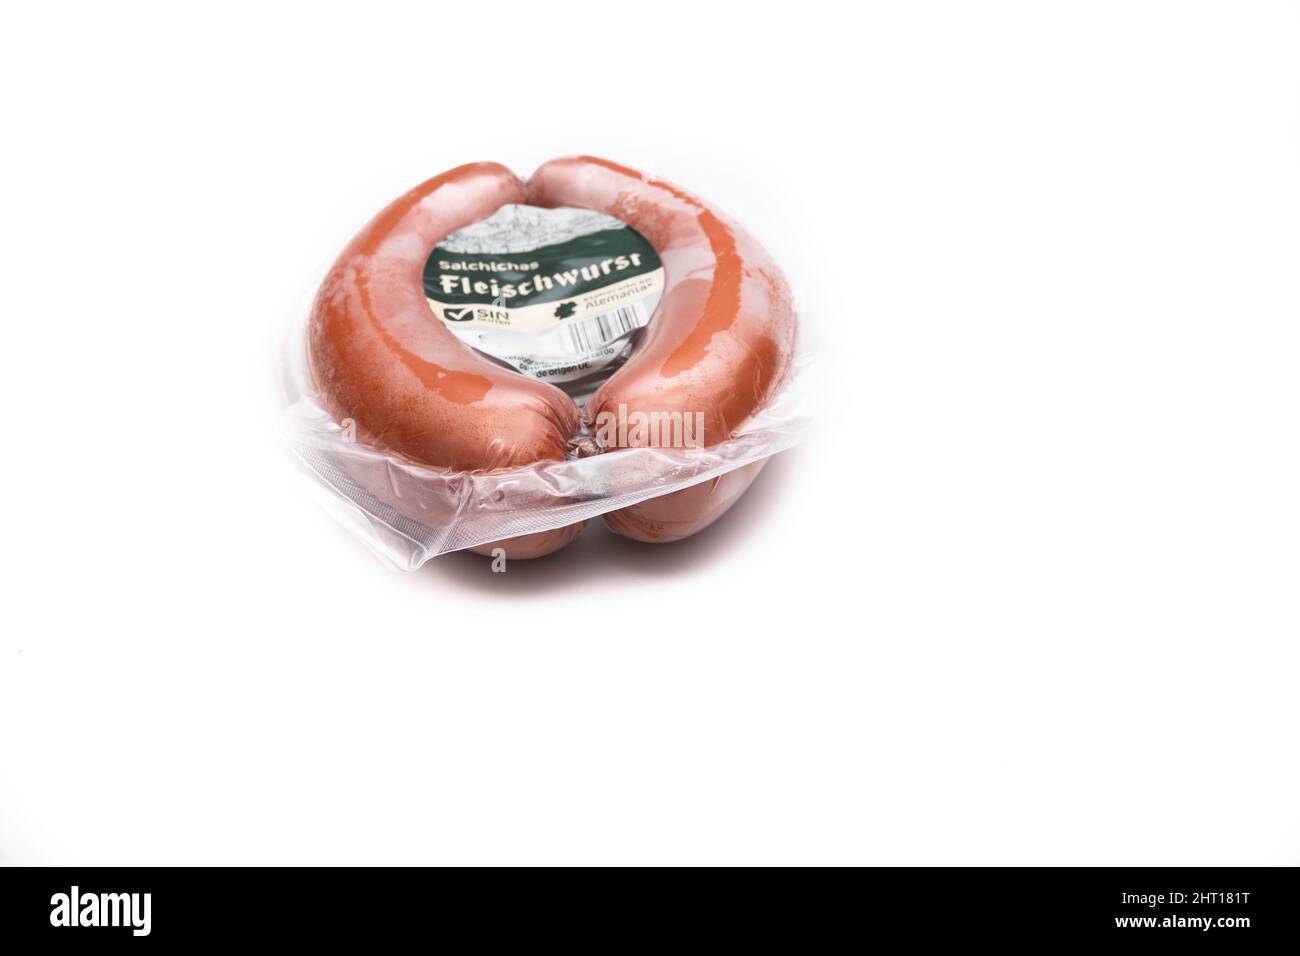 stock - hi-res photography images and fleischwurst Alamy Packaged